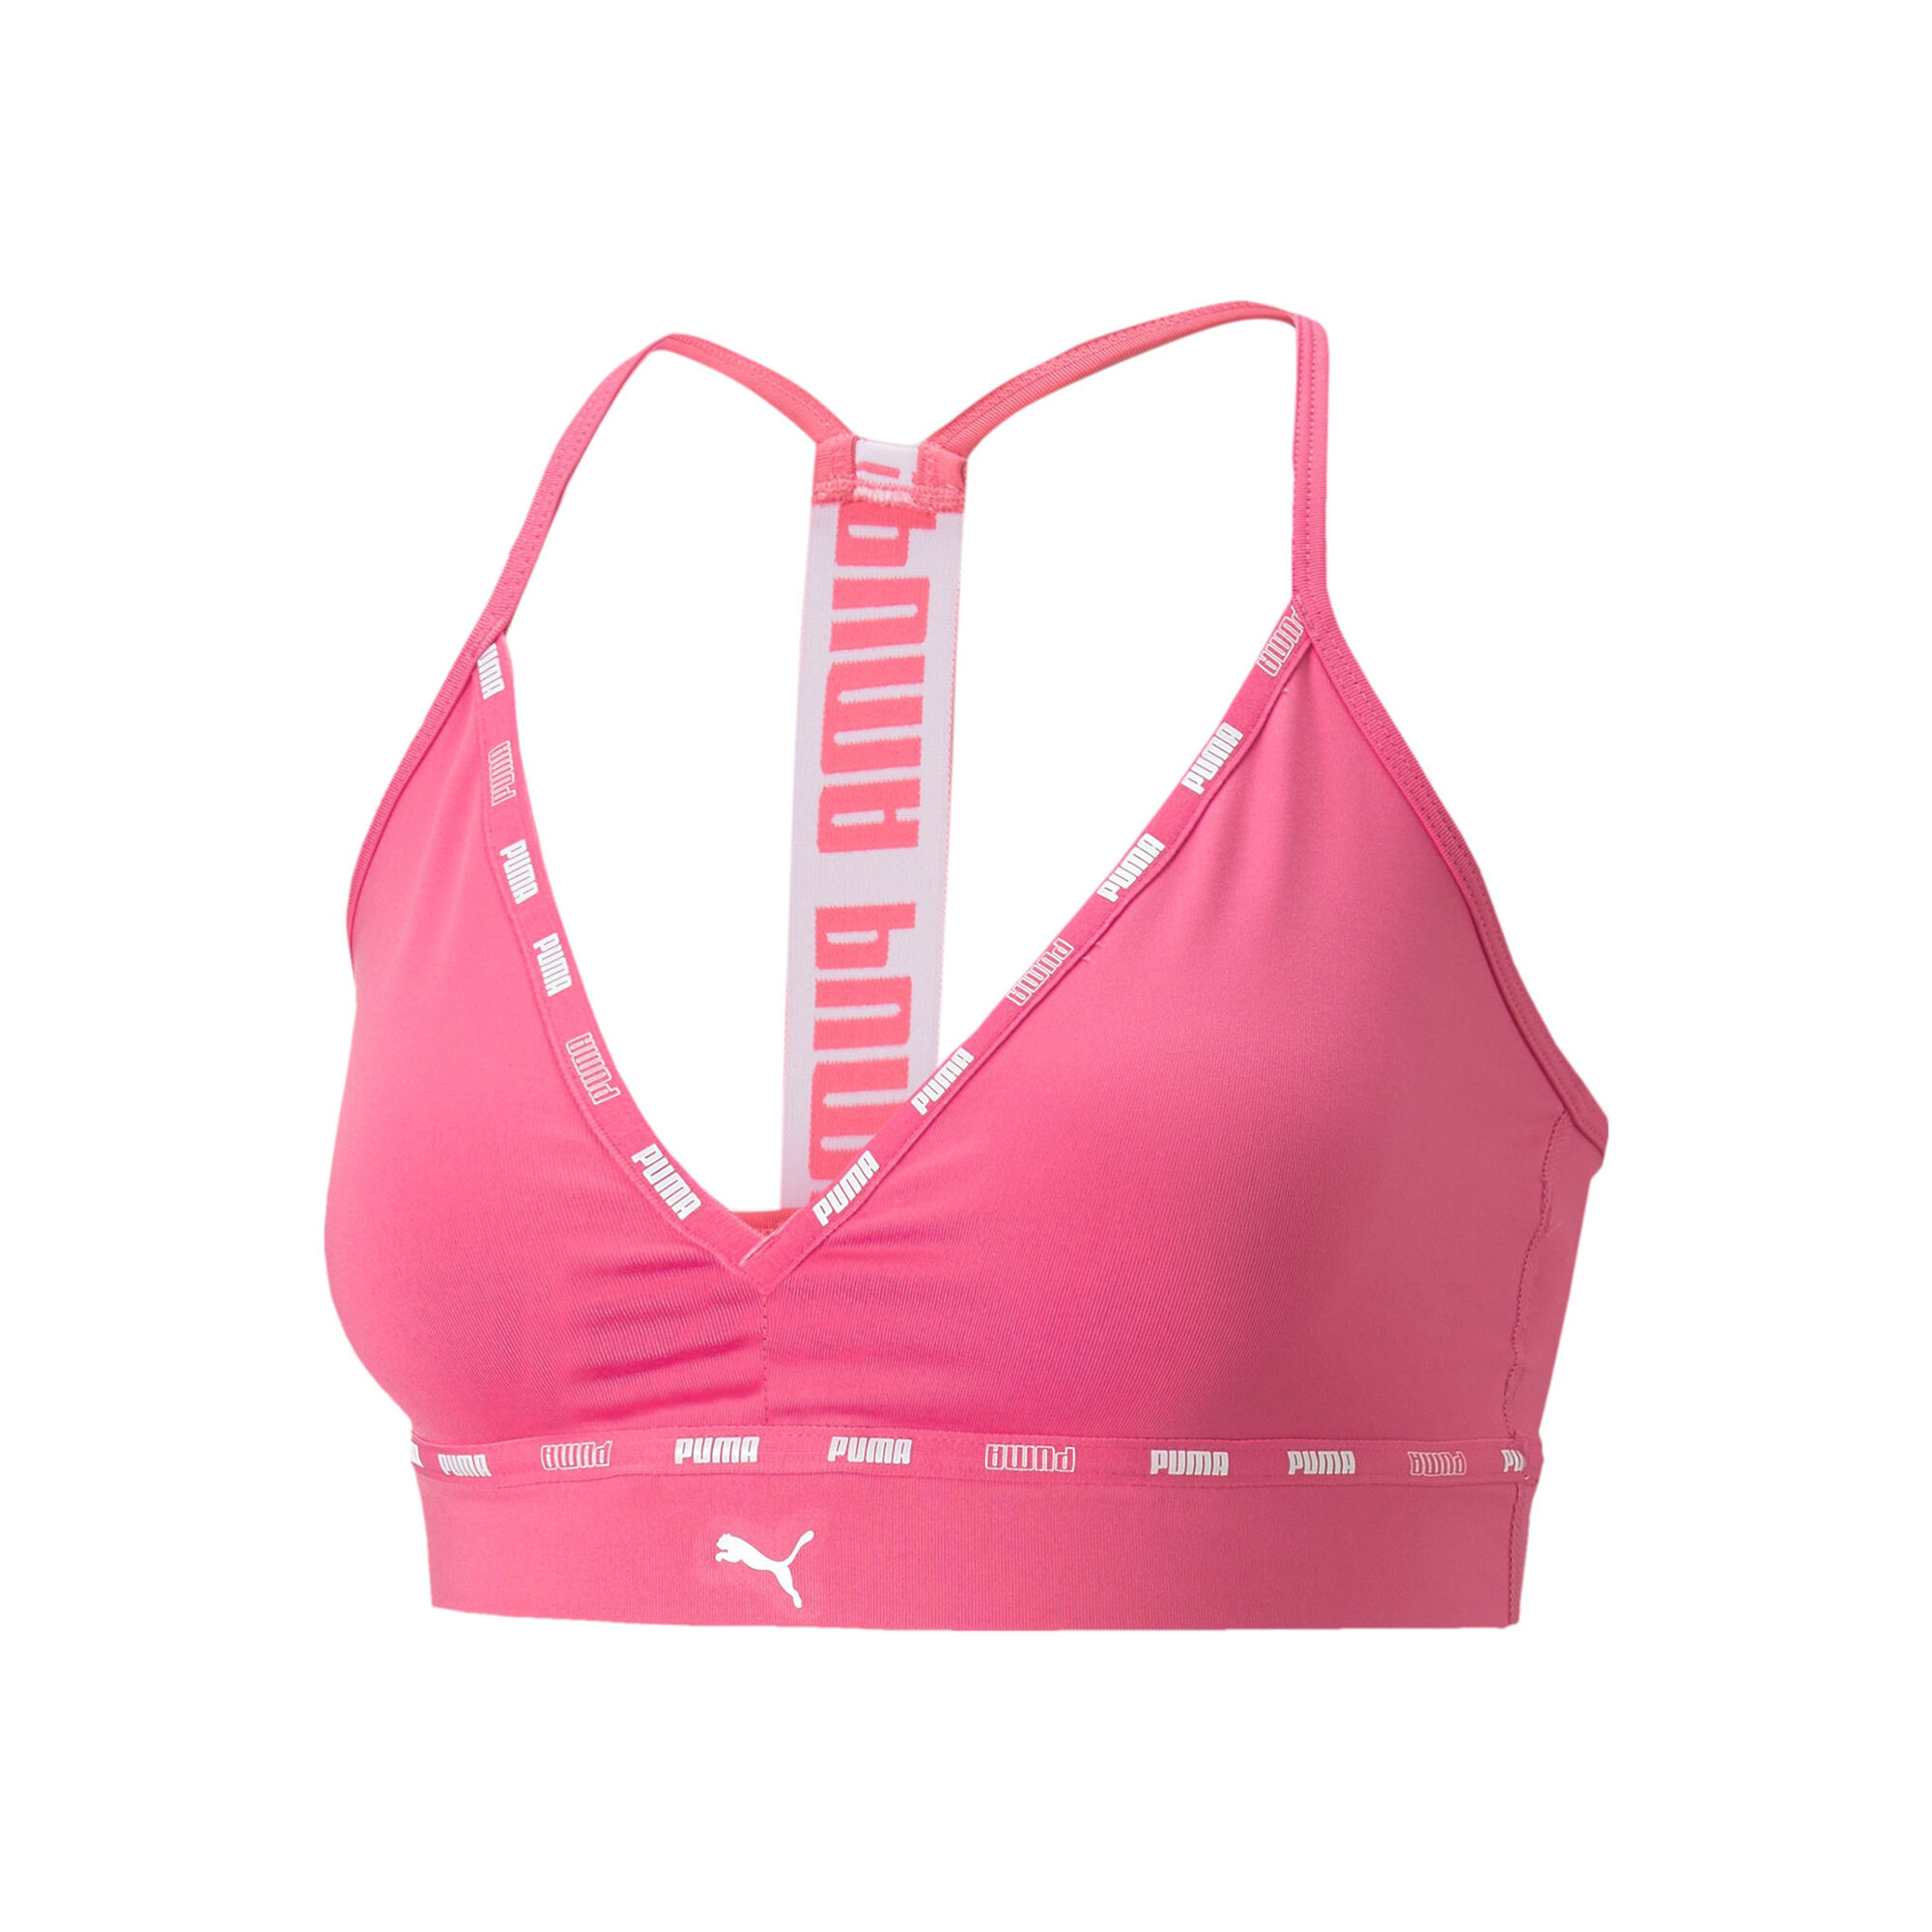 Puma Strong low impact strappy bra in red